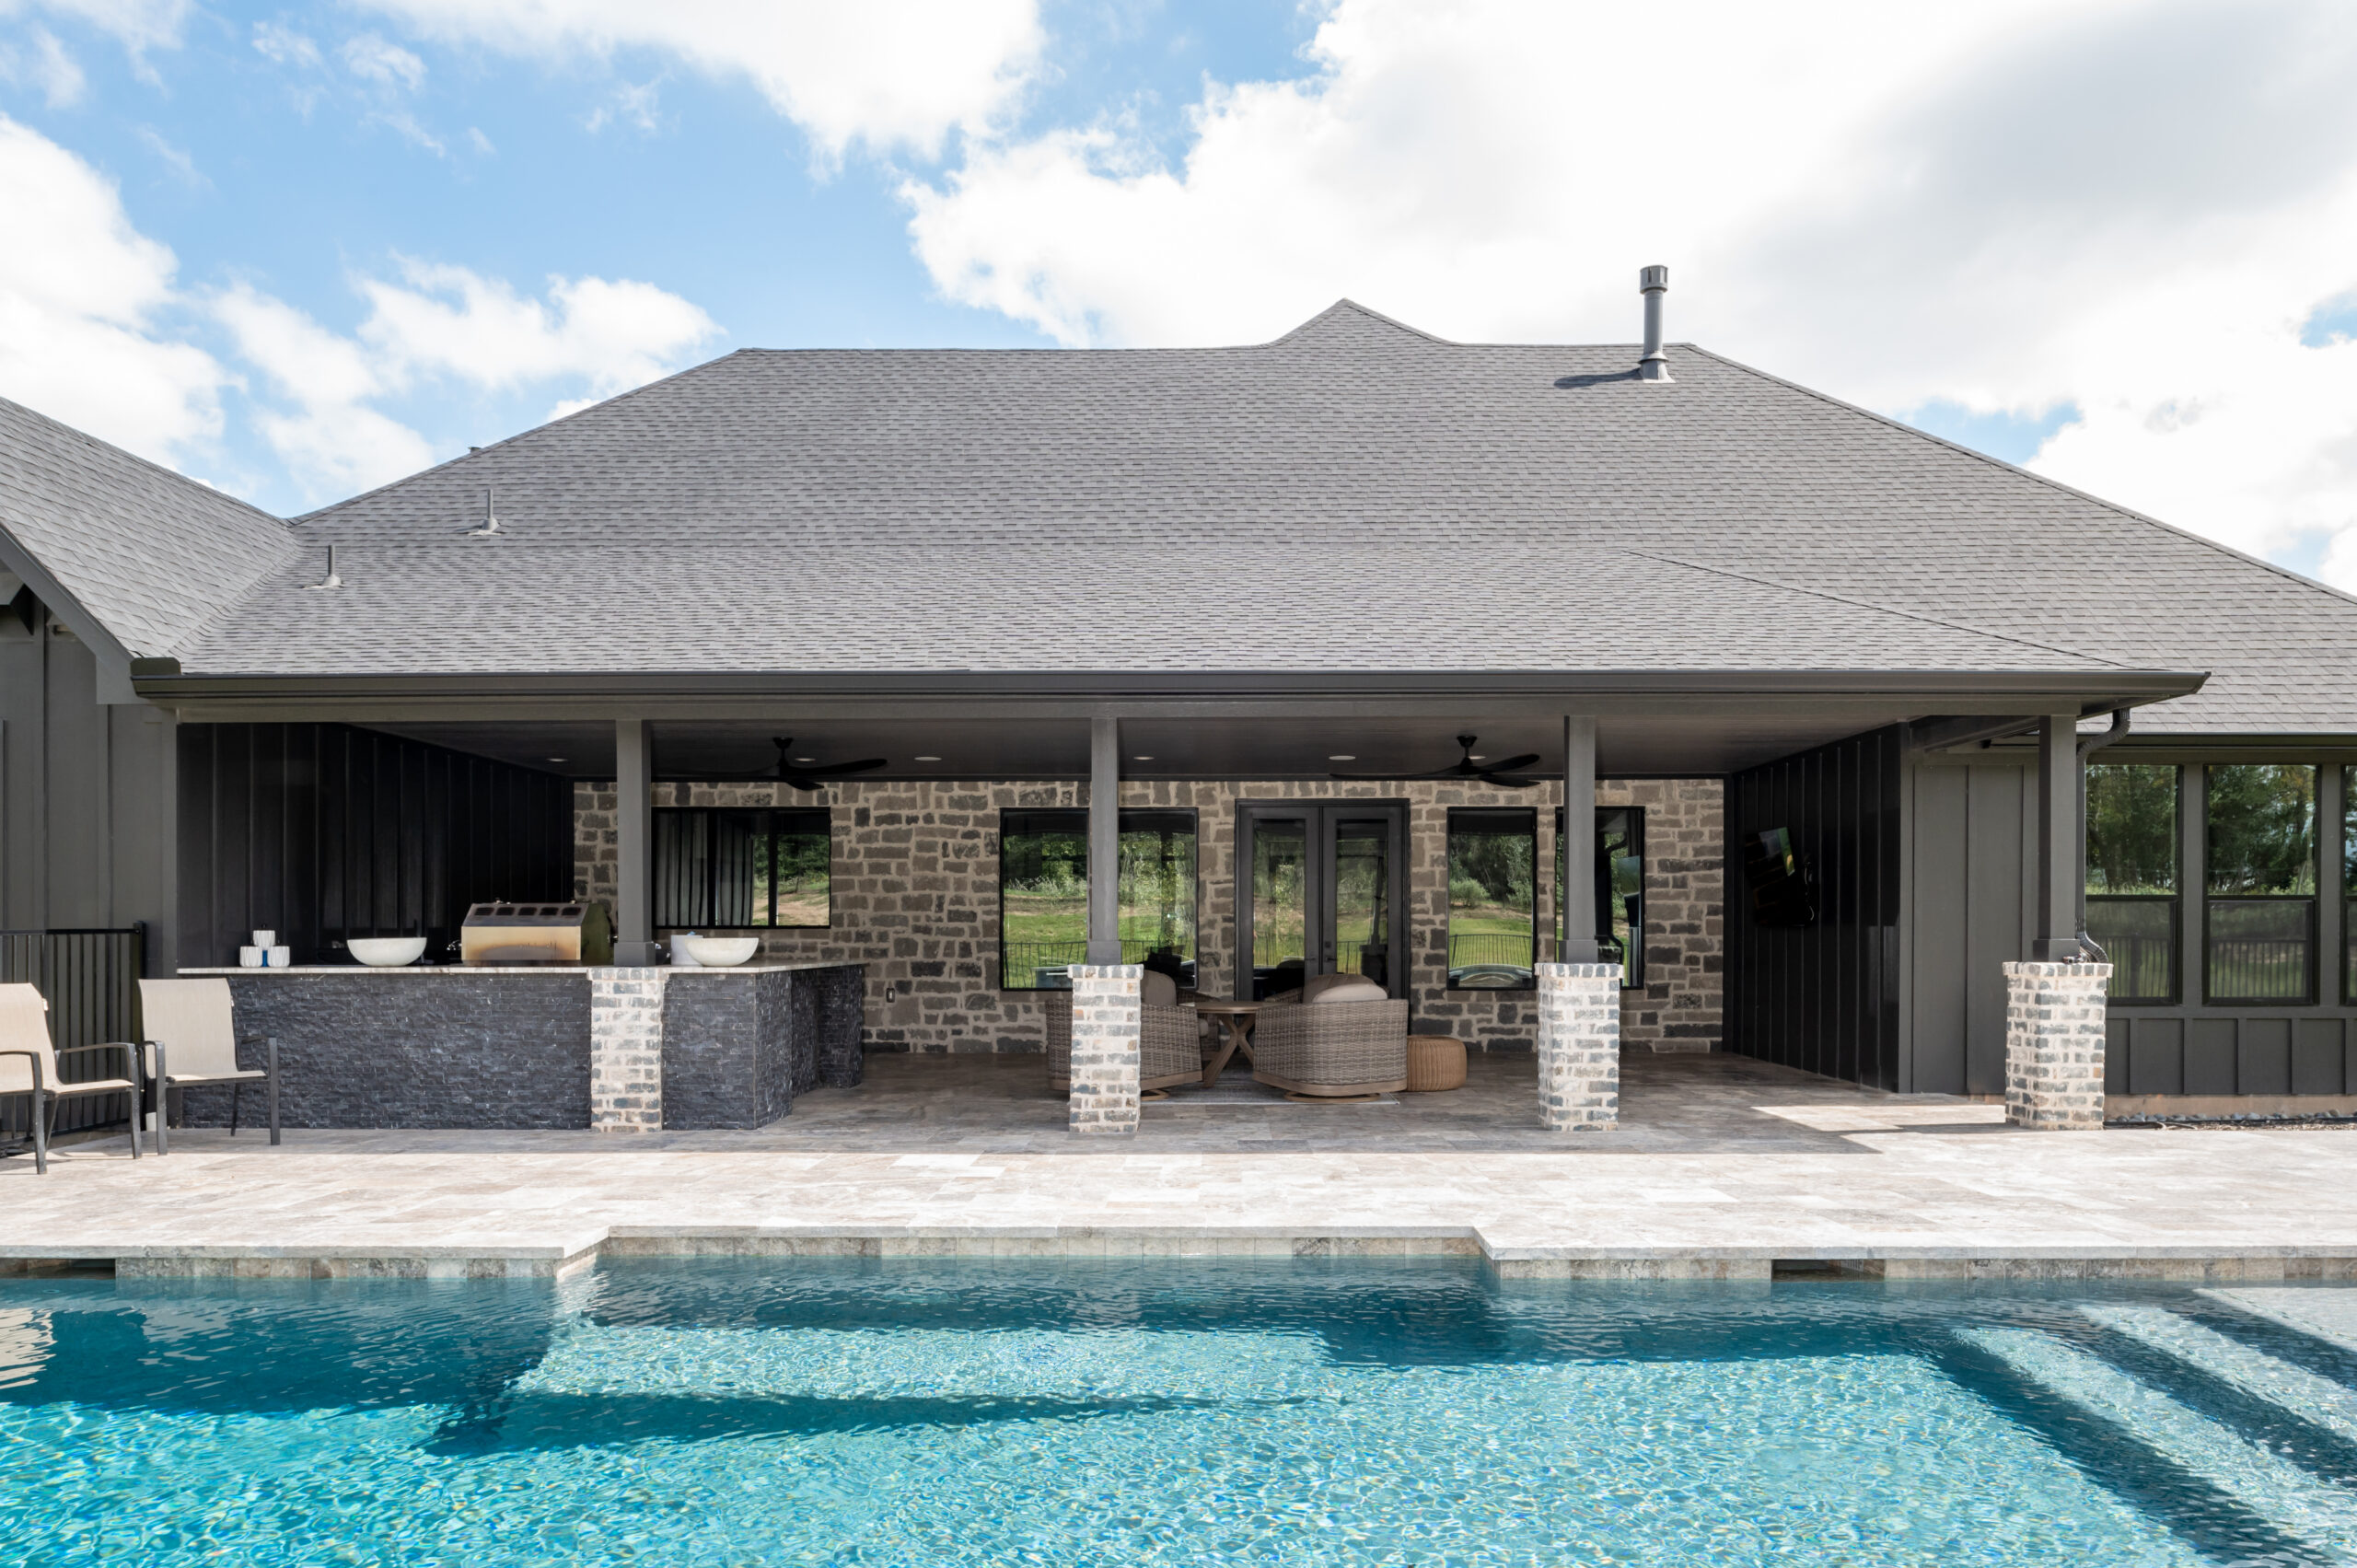 Exterior photography for a beautiful Texas home with stunning brickwork and a pool